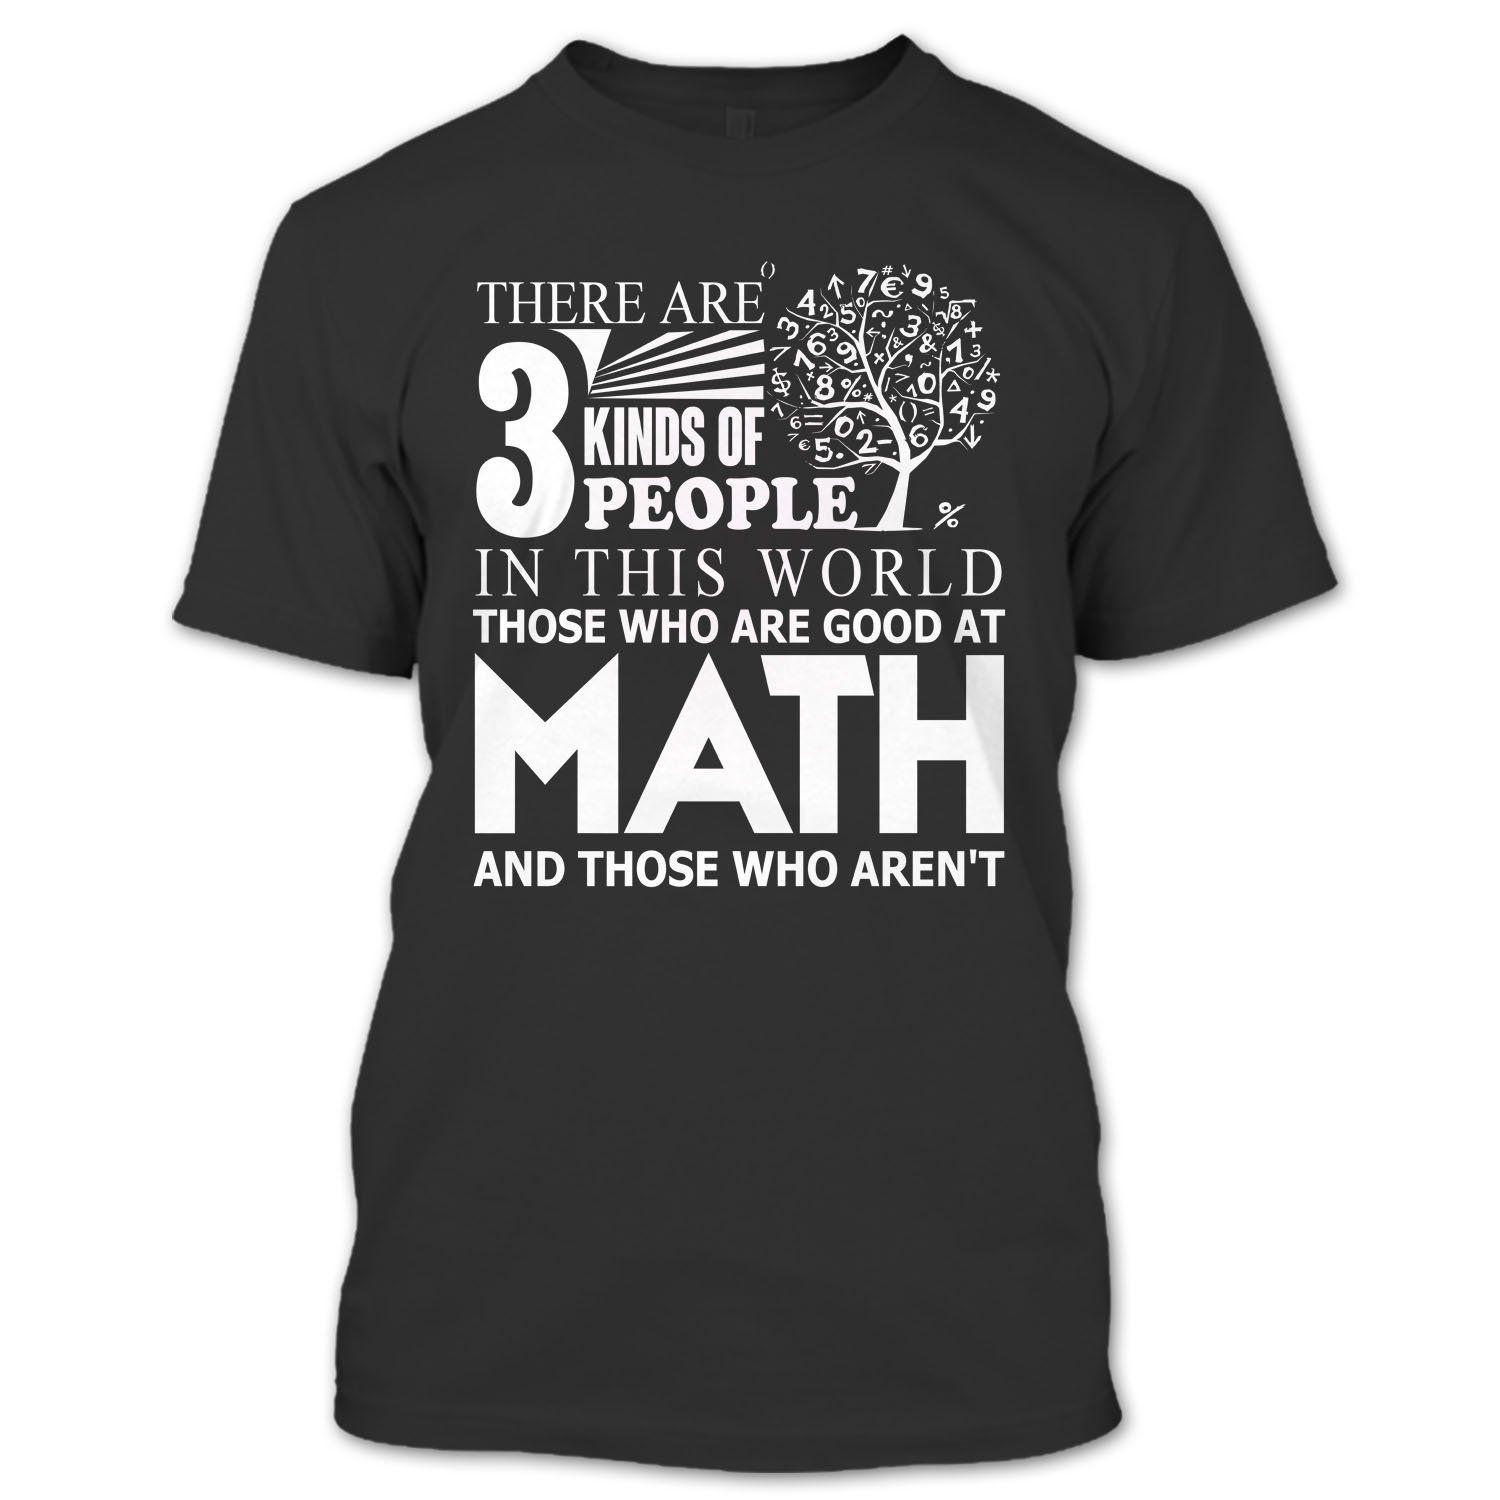 Awesome Math Logo - There Are 3 Kinds Of People T Shirt, Coolest Math Lover T Shirt ...